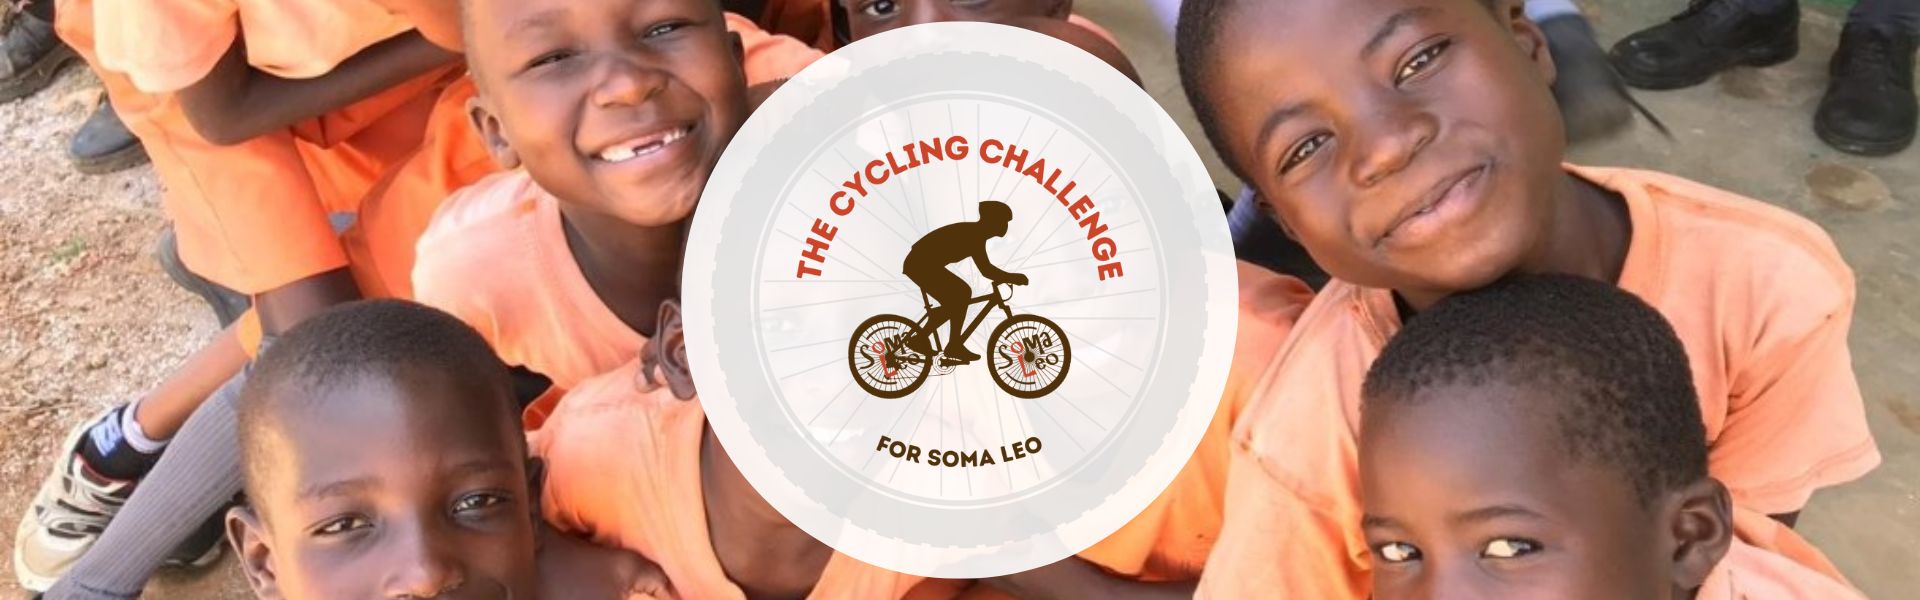 We’re aiming to raise £5,000 through The Cycling Challenge for Soma Leo